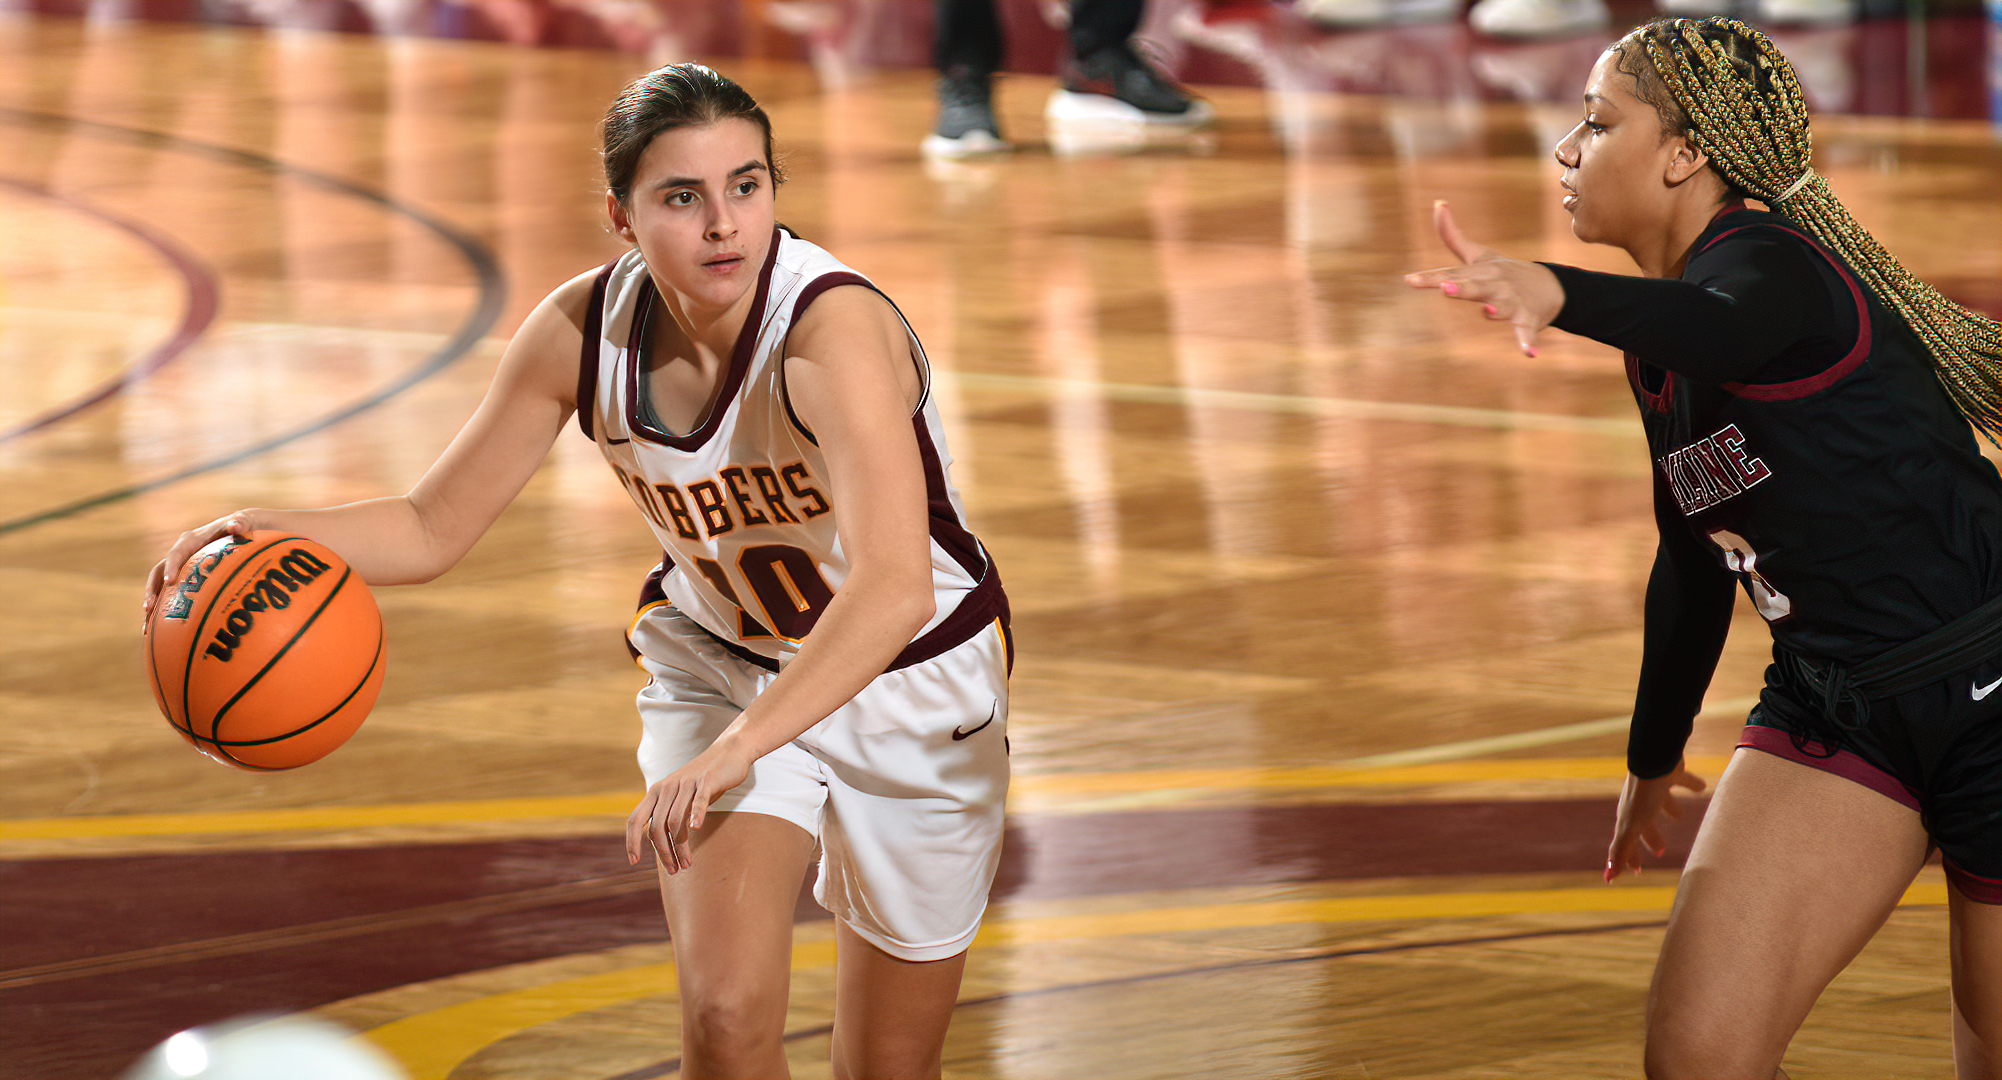 Sophomore Carlee Sieben brings the ball up the court during the second half of the Cobbers' semifinal win over Hamline.